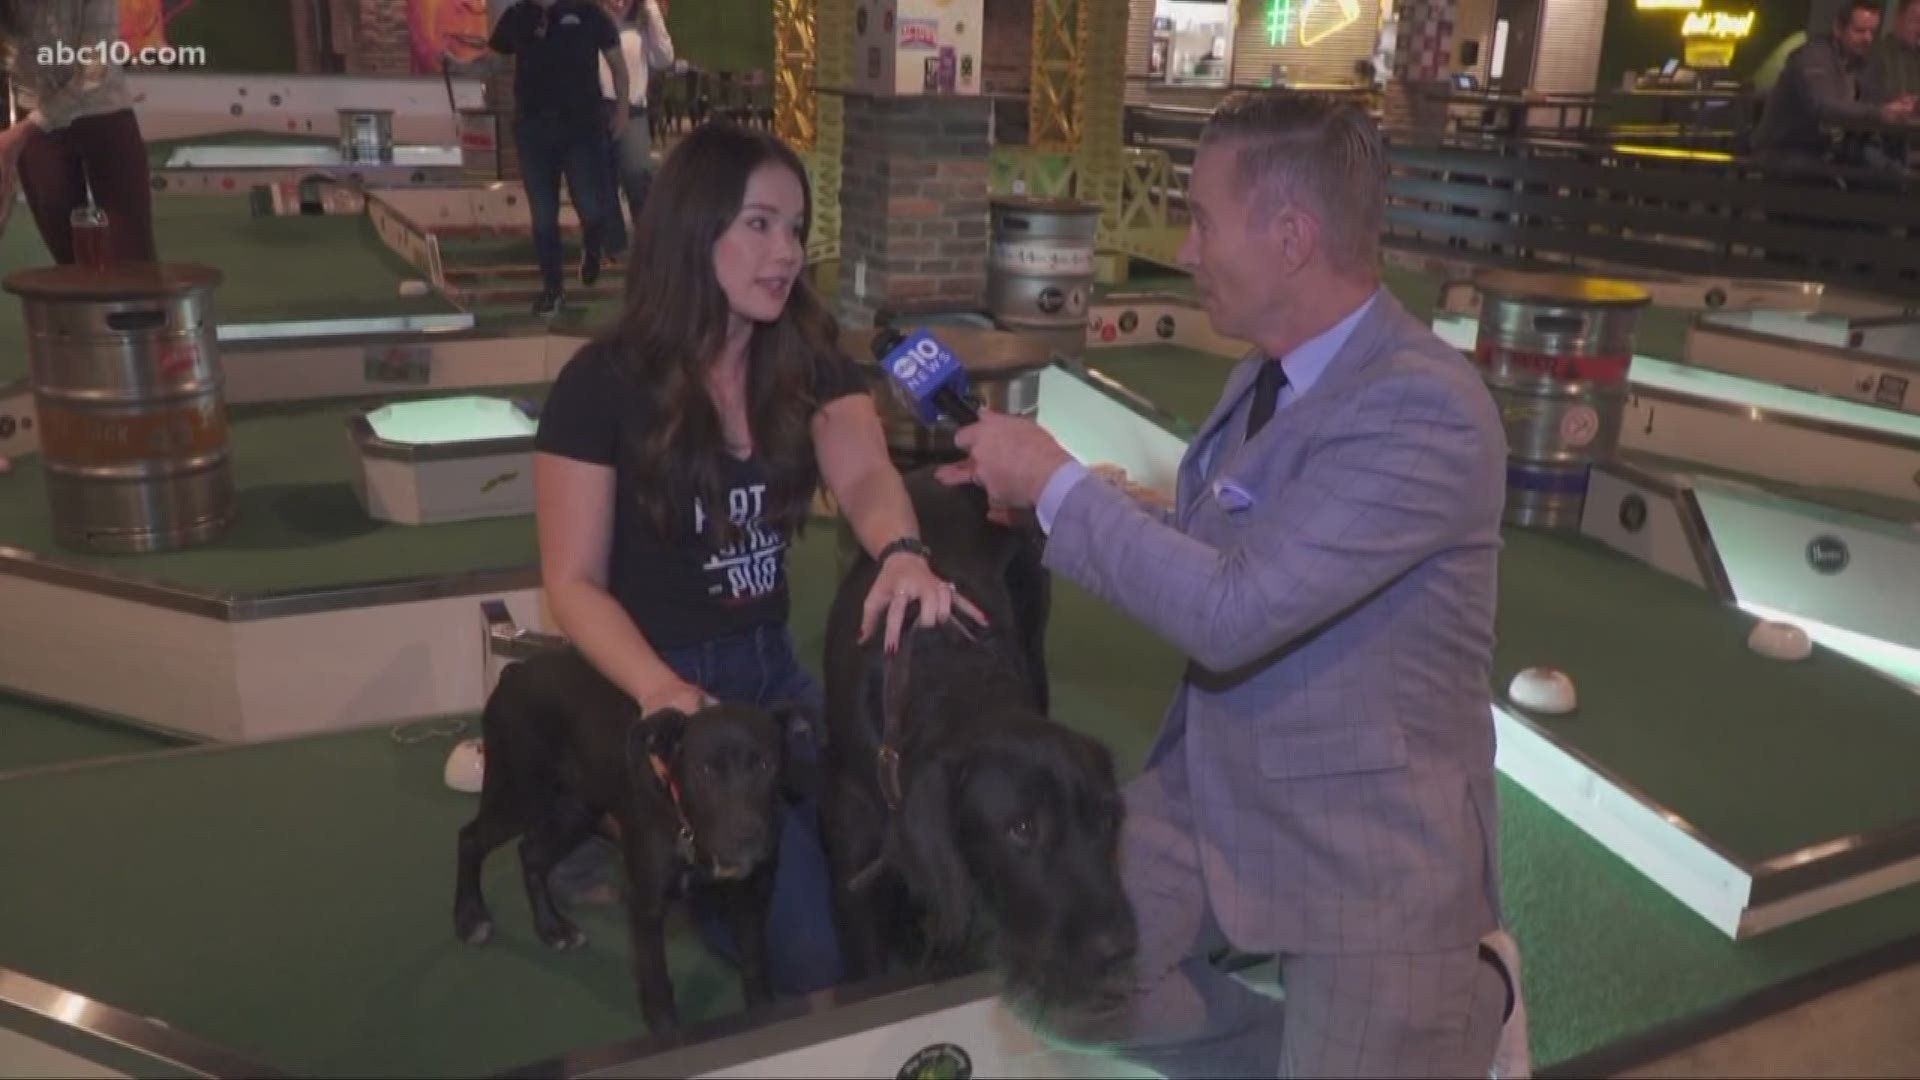 Every Sunday in March the Sacramento SPCA and DOCO’s Flatstick Pub are teaming to raise money in an event called Putts & Pups! Mark S. Allen checked it out.